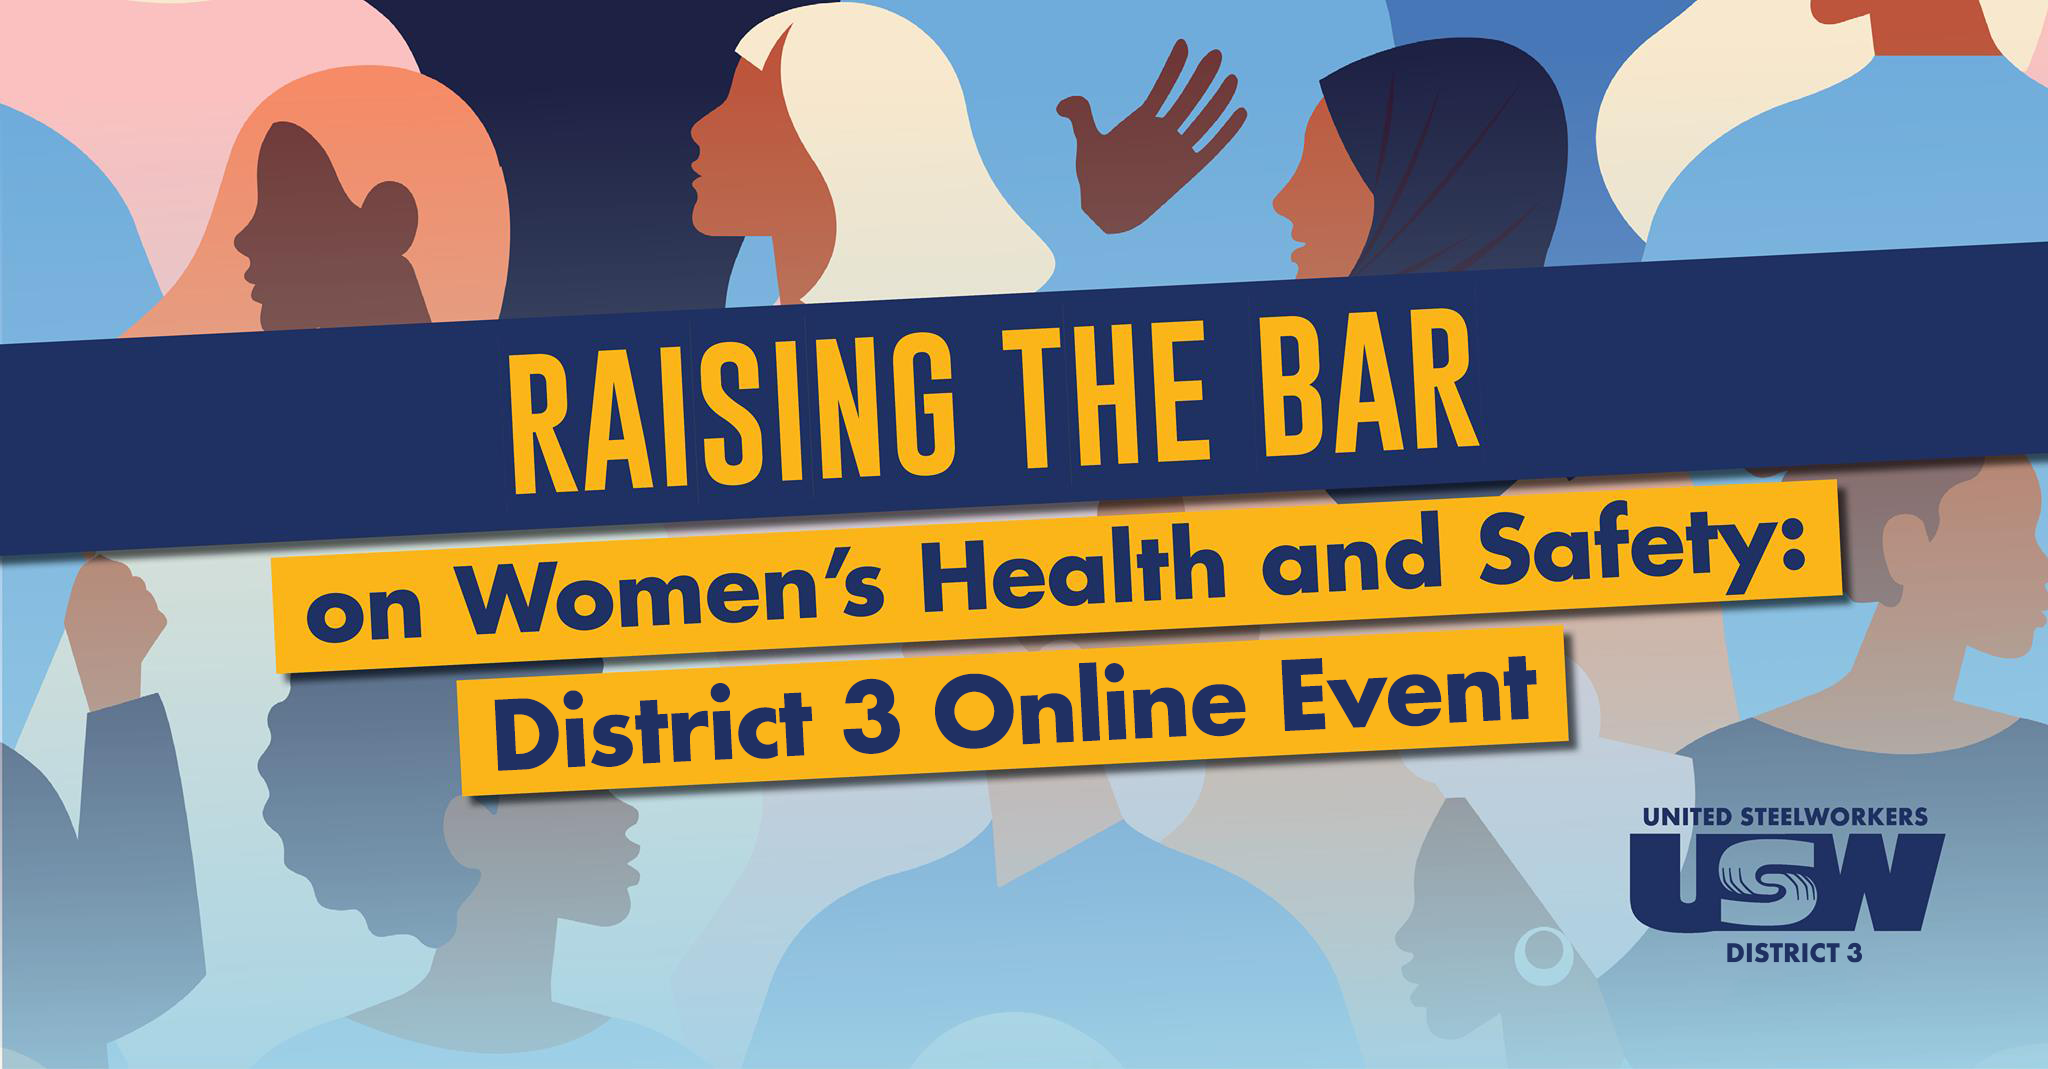 Raising The Bar - An Event Hosted by District 3